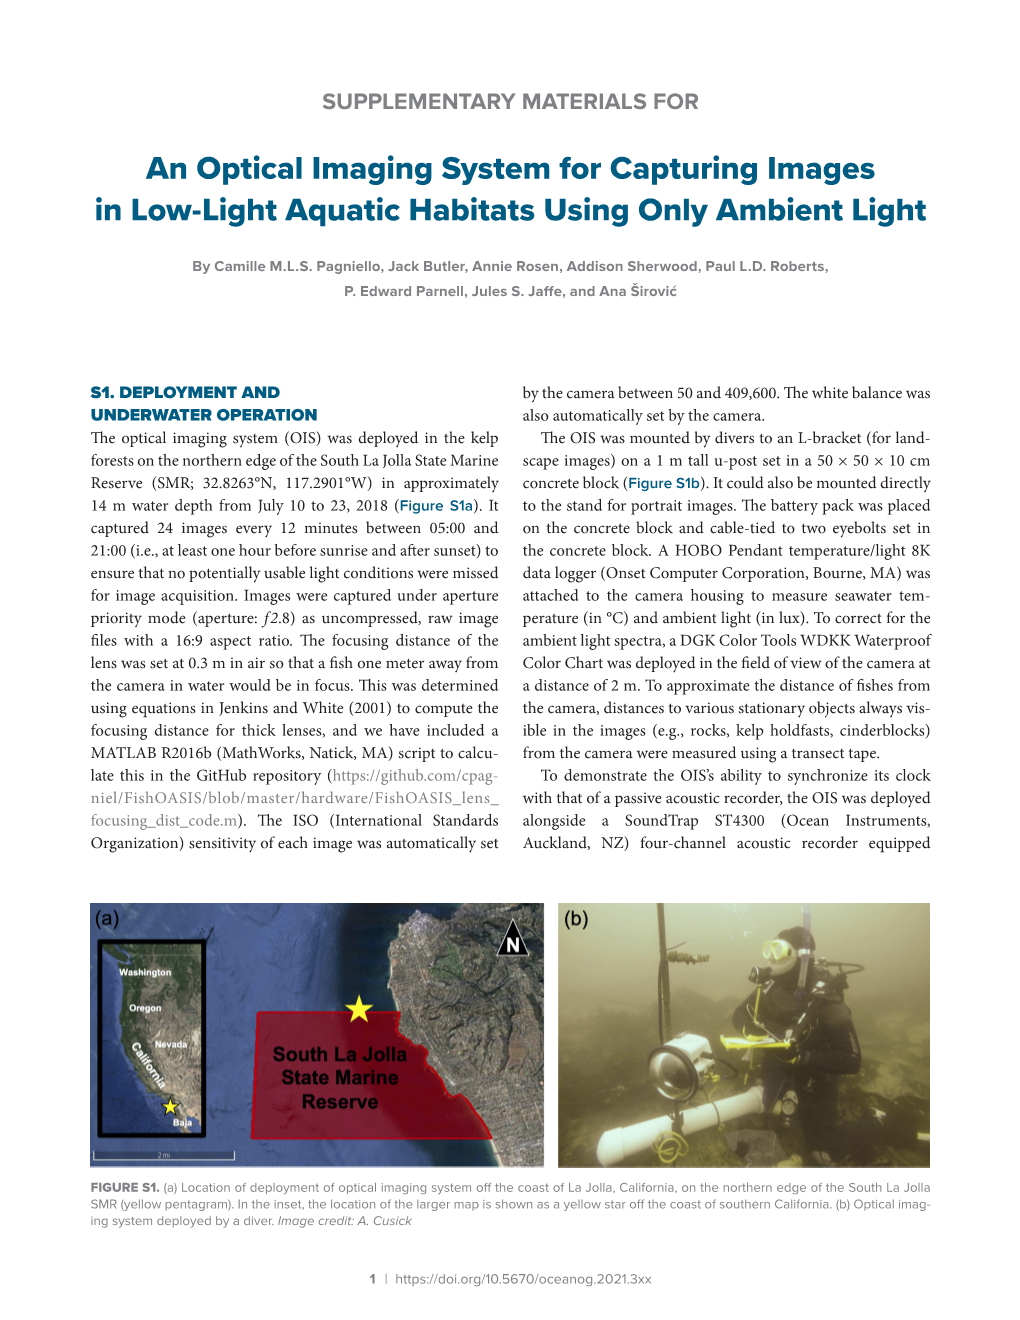 An Optical Imaging System for Capturing Images in Low-Light Aquatic Habitats Using Only Ambient Light